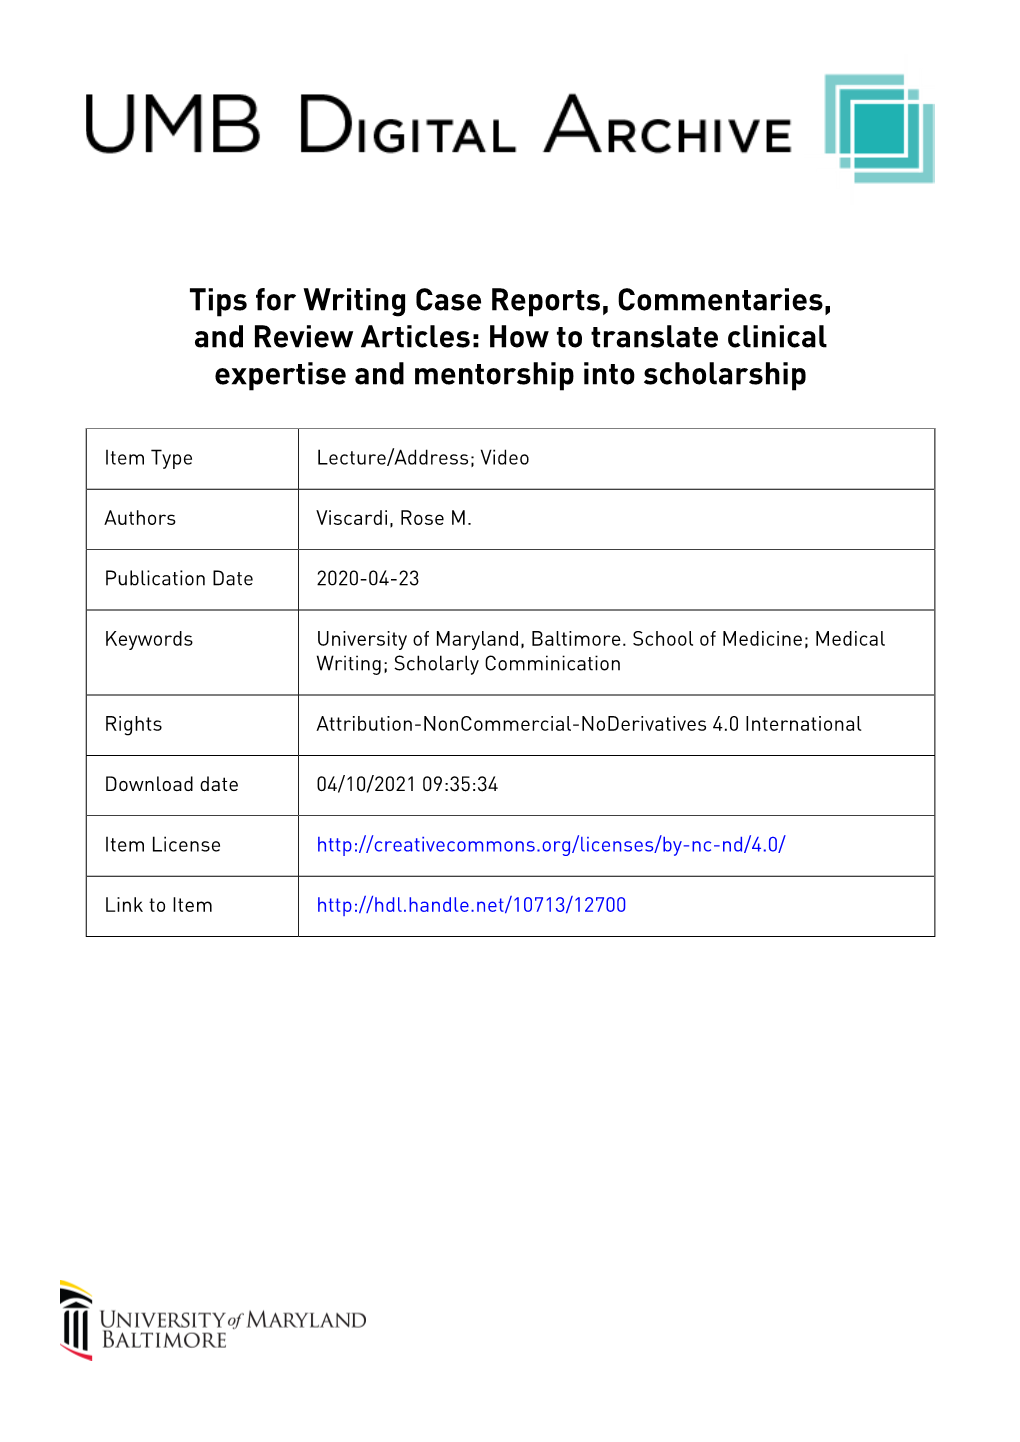 Tips for Writing Case Reports, Commentaries, and Review Articles: How to Translate Clinical Expertise and Mentorship Into Scholarship